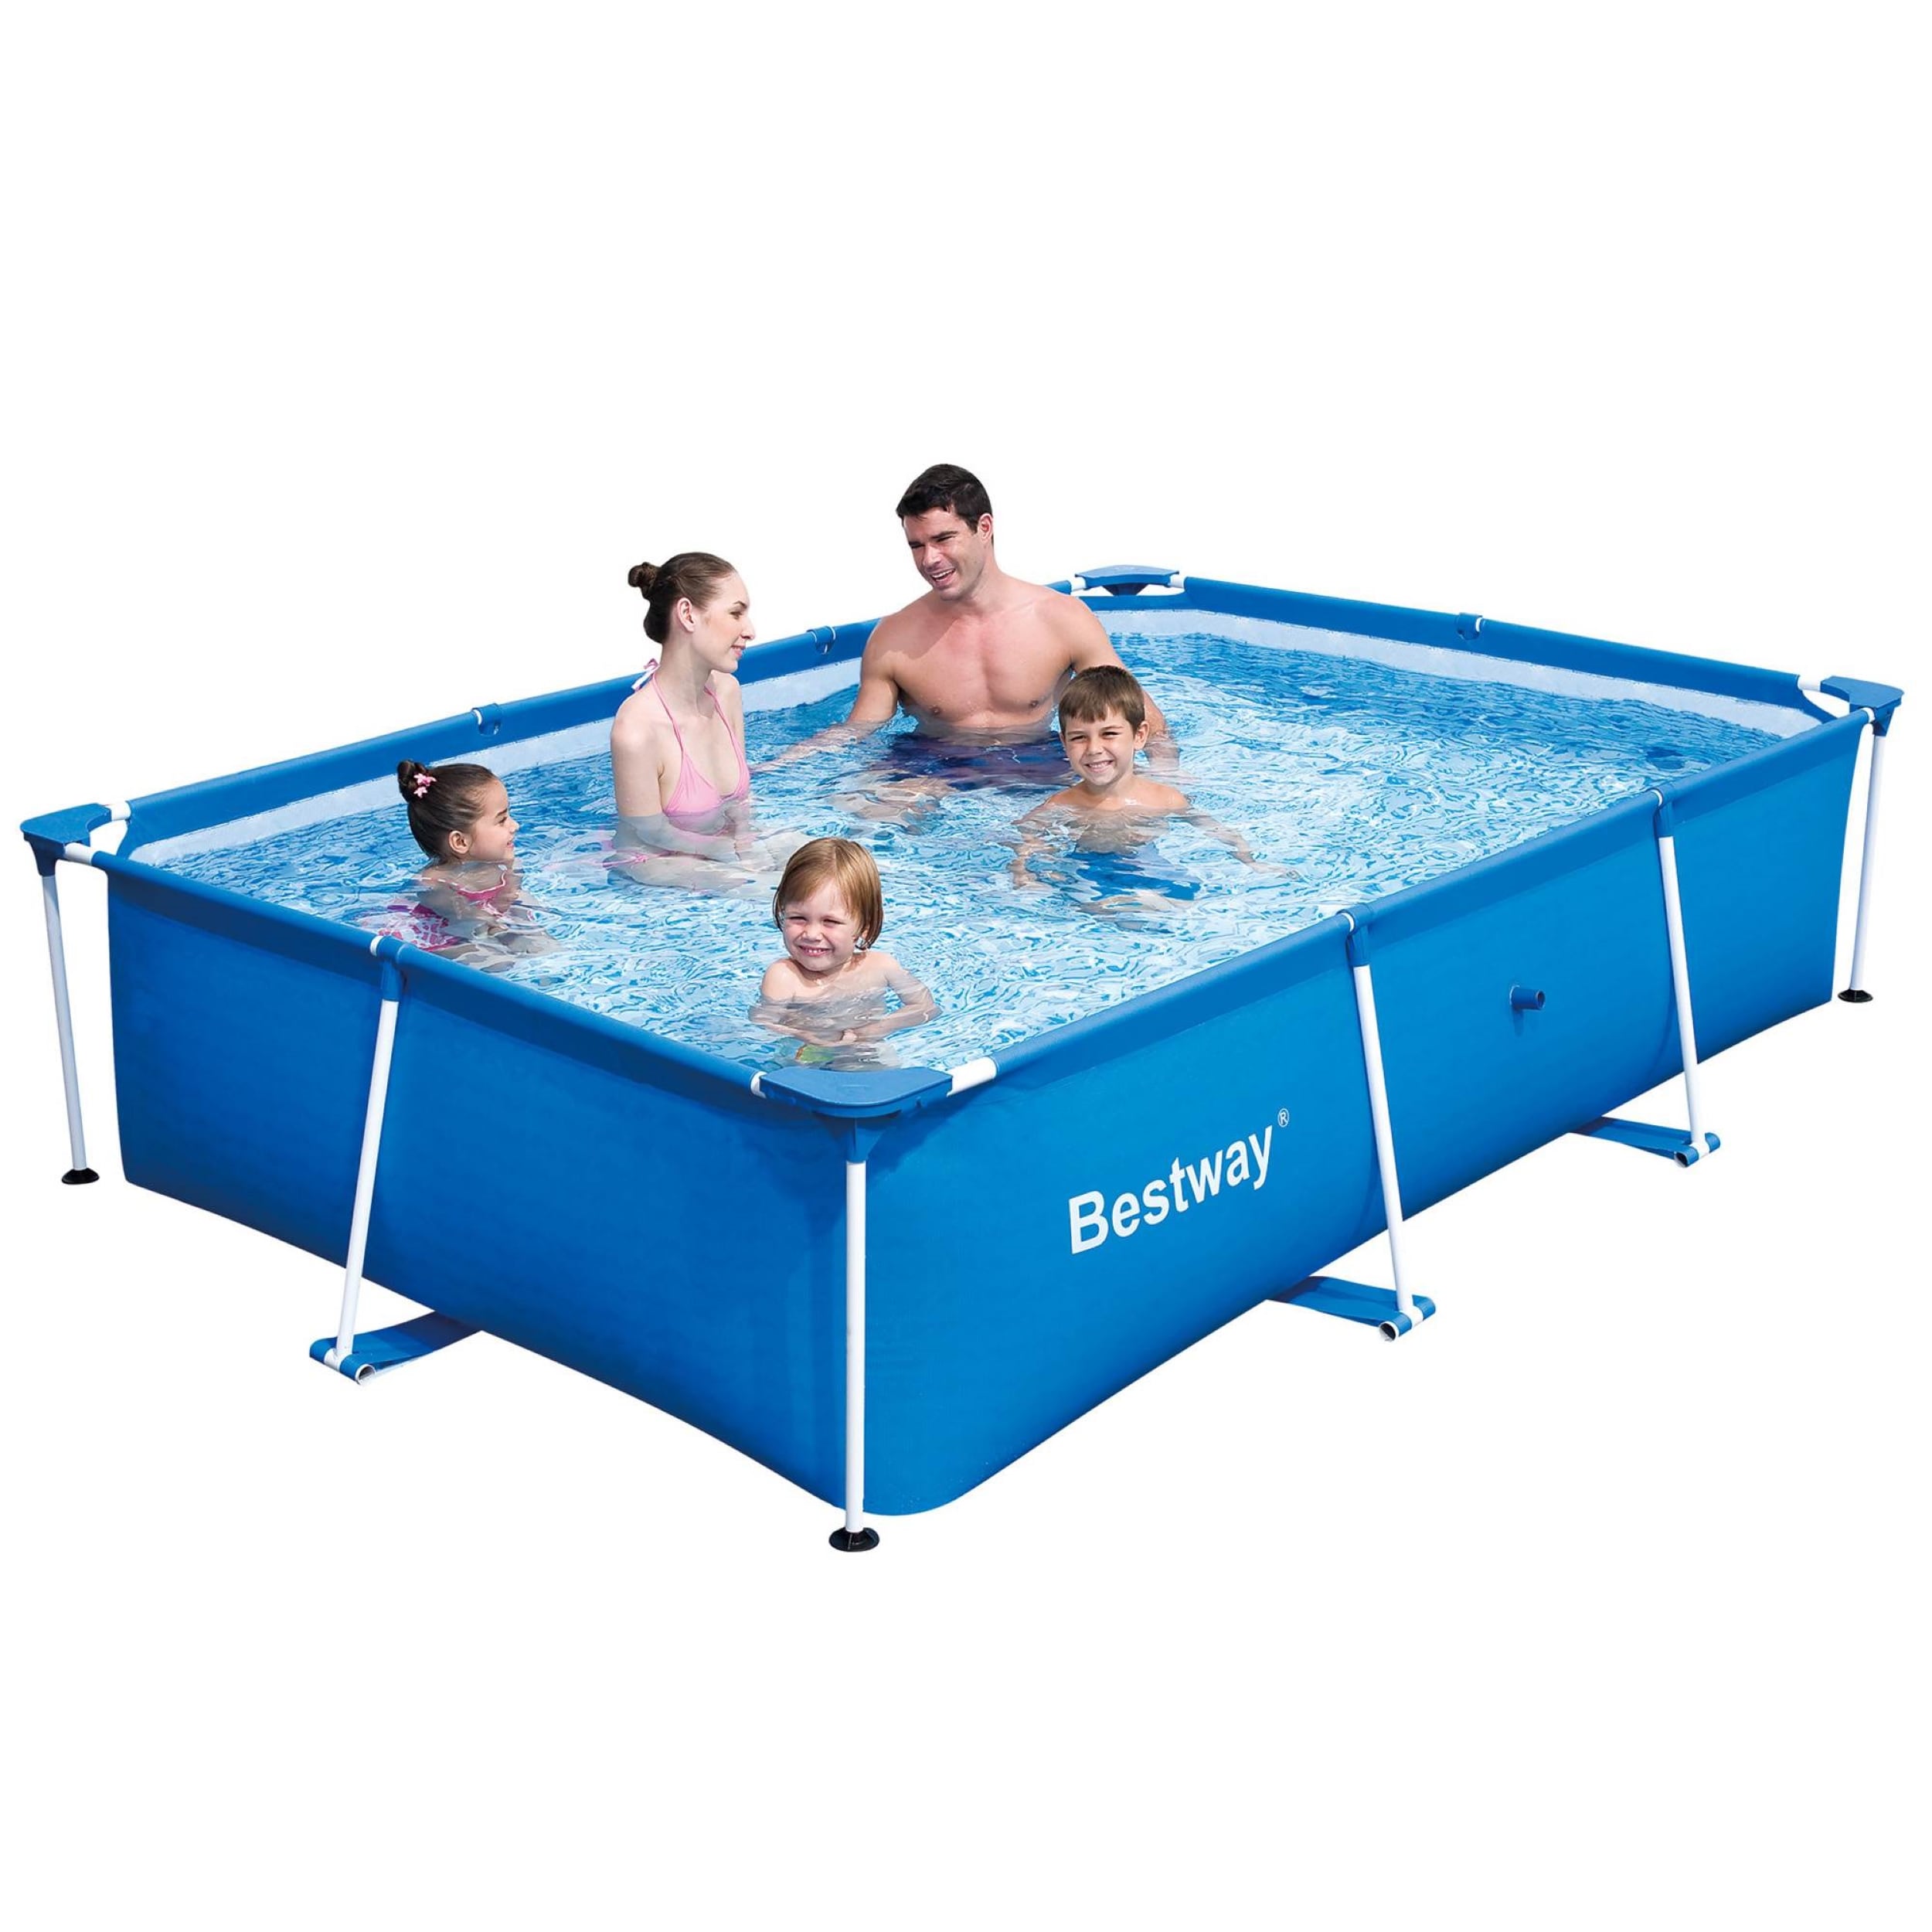 Bestway Splash Frame Frame Above-Ground Metal Pools department Pool Above-Ground Rectangle at 6.5-ft x 26-in 10-ft x the in